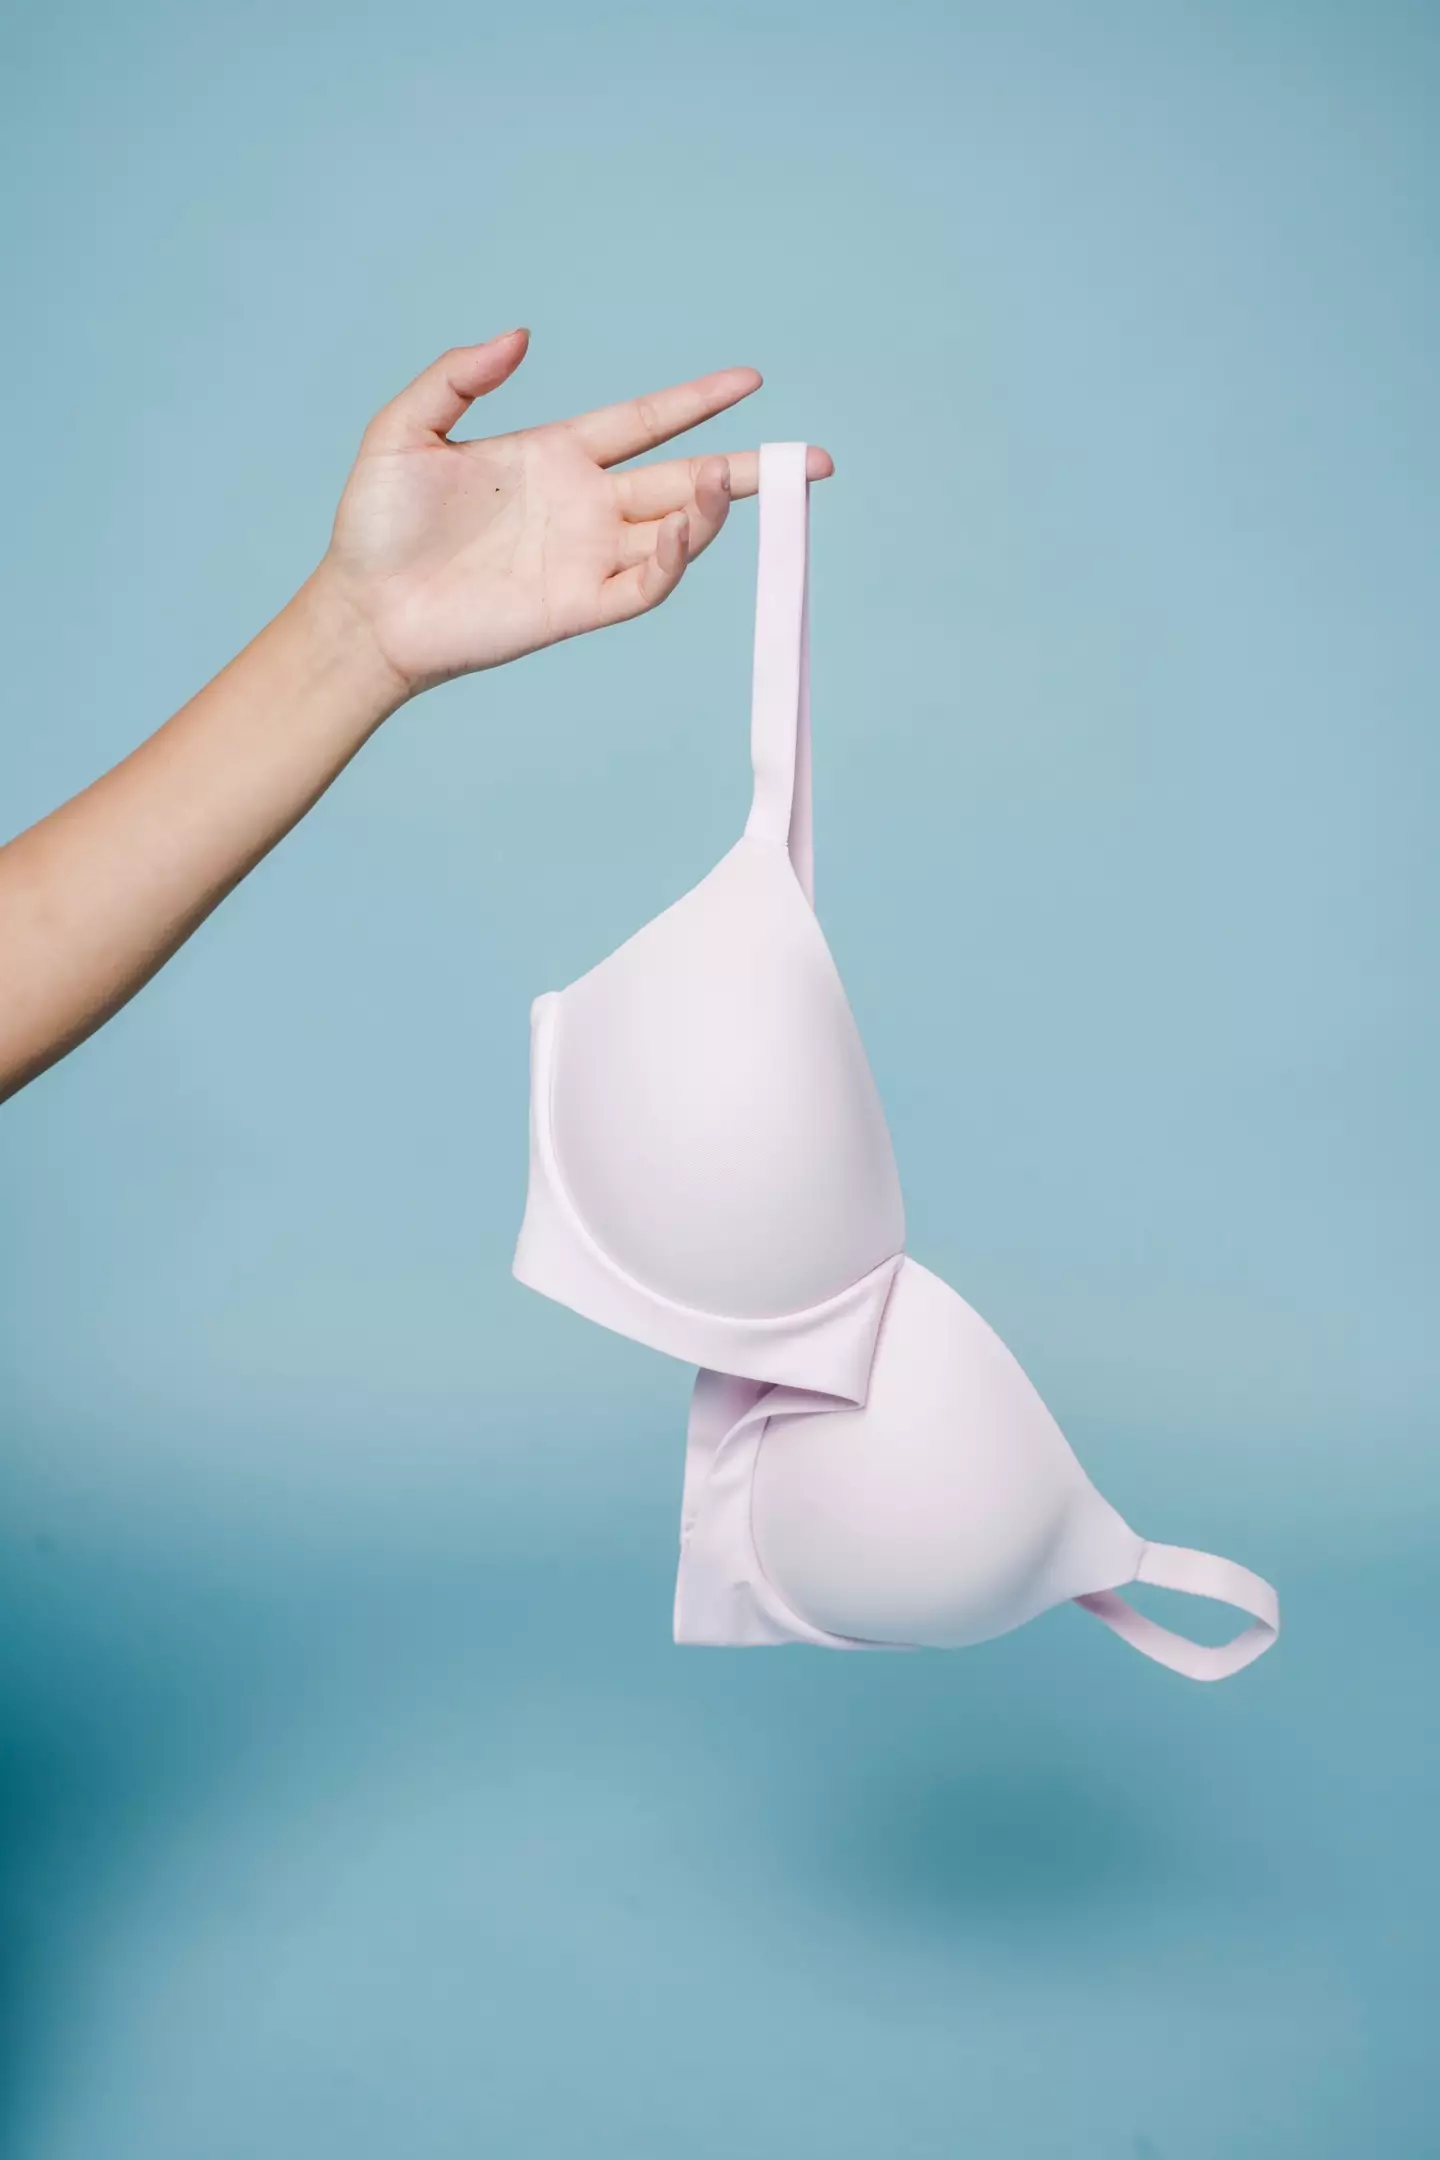 Apparently hooking your bra from the front can damage it. (